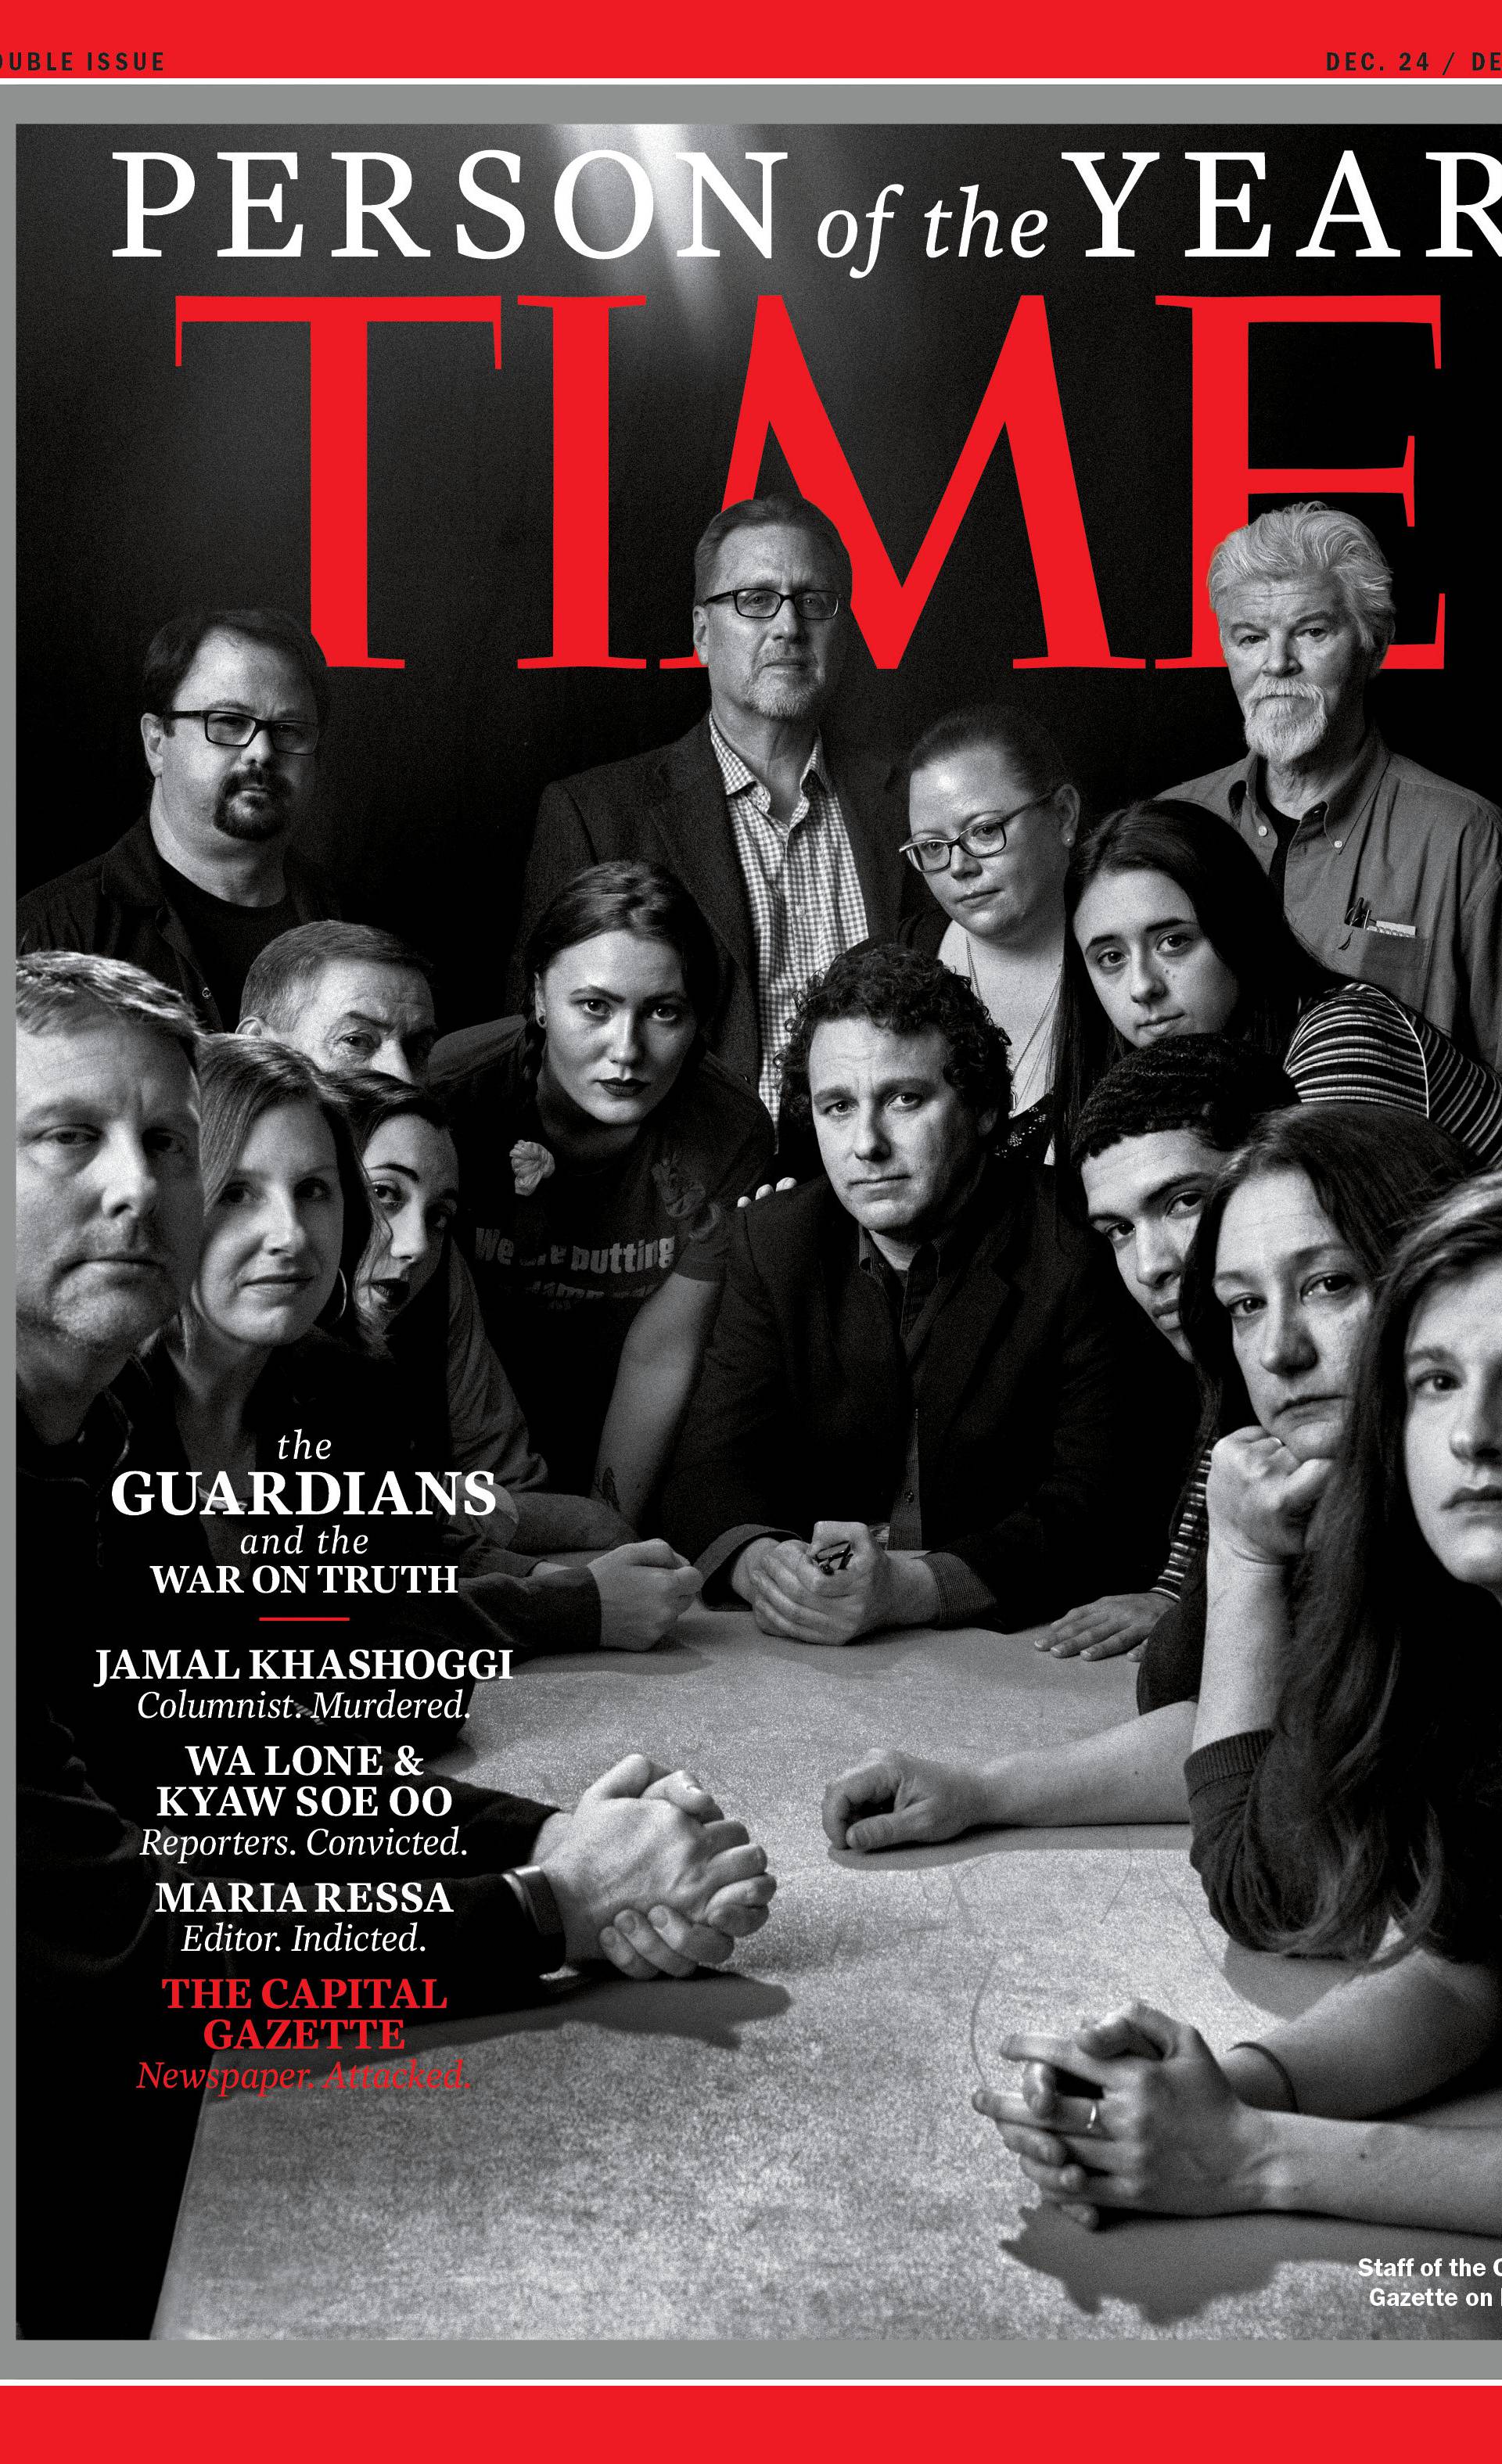 TIME's Person of the Year 2018 cover which named journalists, including a slain Saudi Arabian writer and a pair of Reuters journalists imprisoned by Myanmar's government, as its "Person of the Year